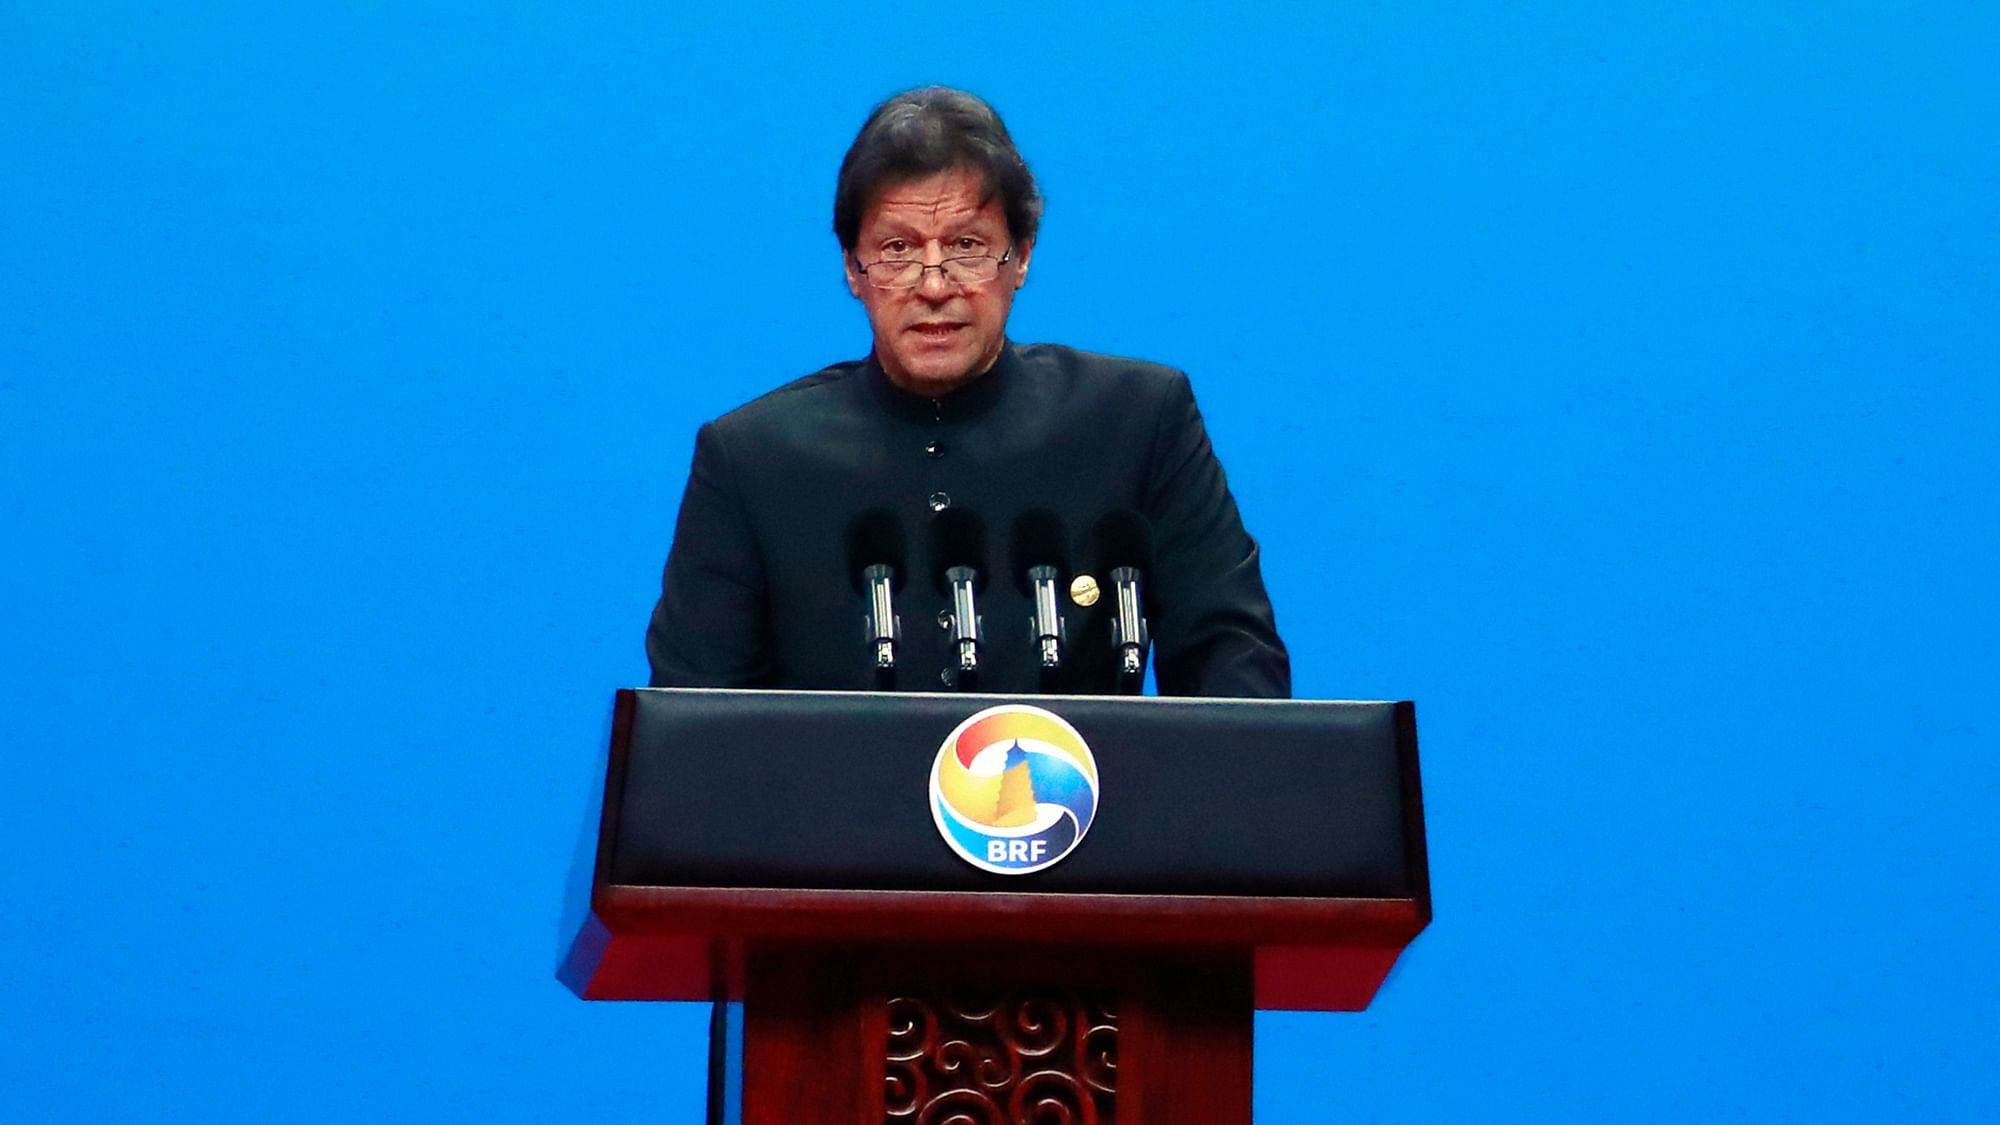 Pakistani Prime Minister Imran Khan delivers his speech for the opening ceremony of the second Belt and Road Forum for International Cooperation (BRF) on 26 April, 2019 in Beijing.